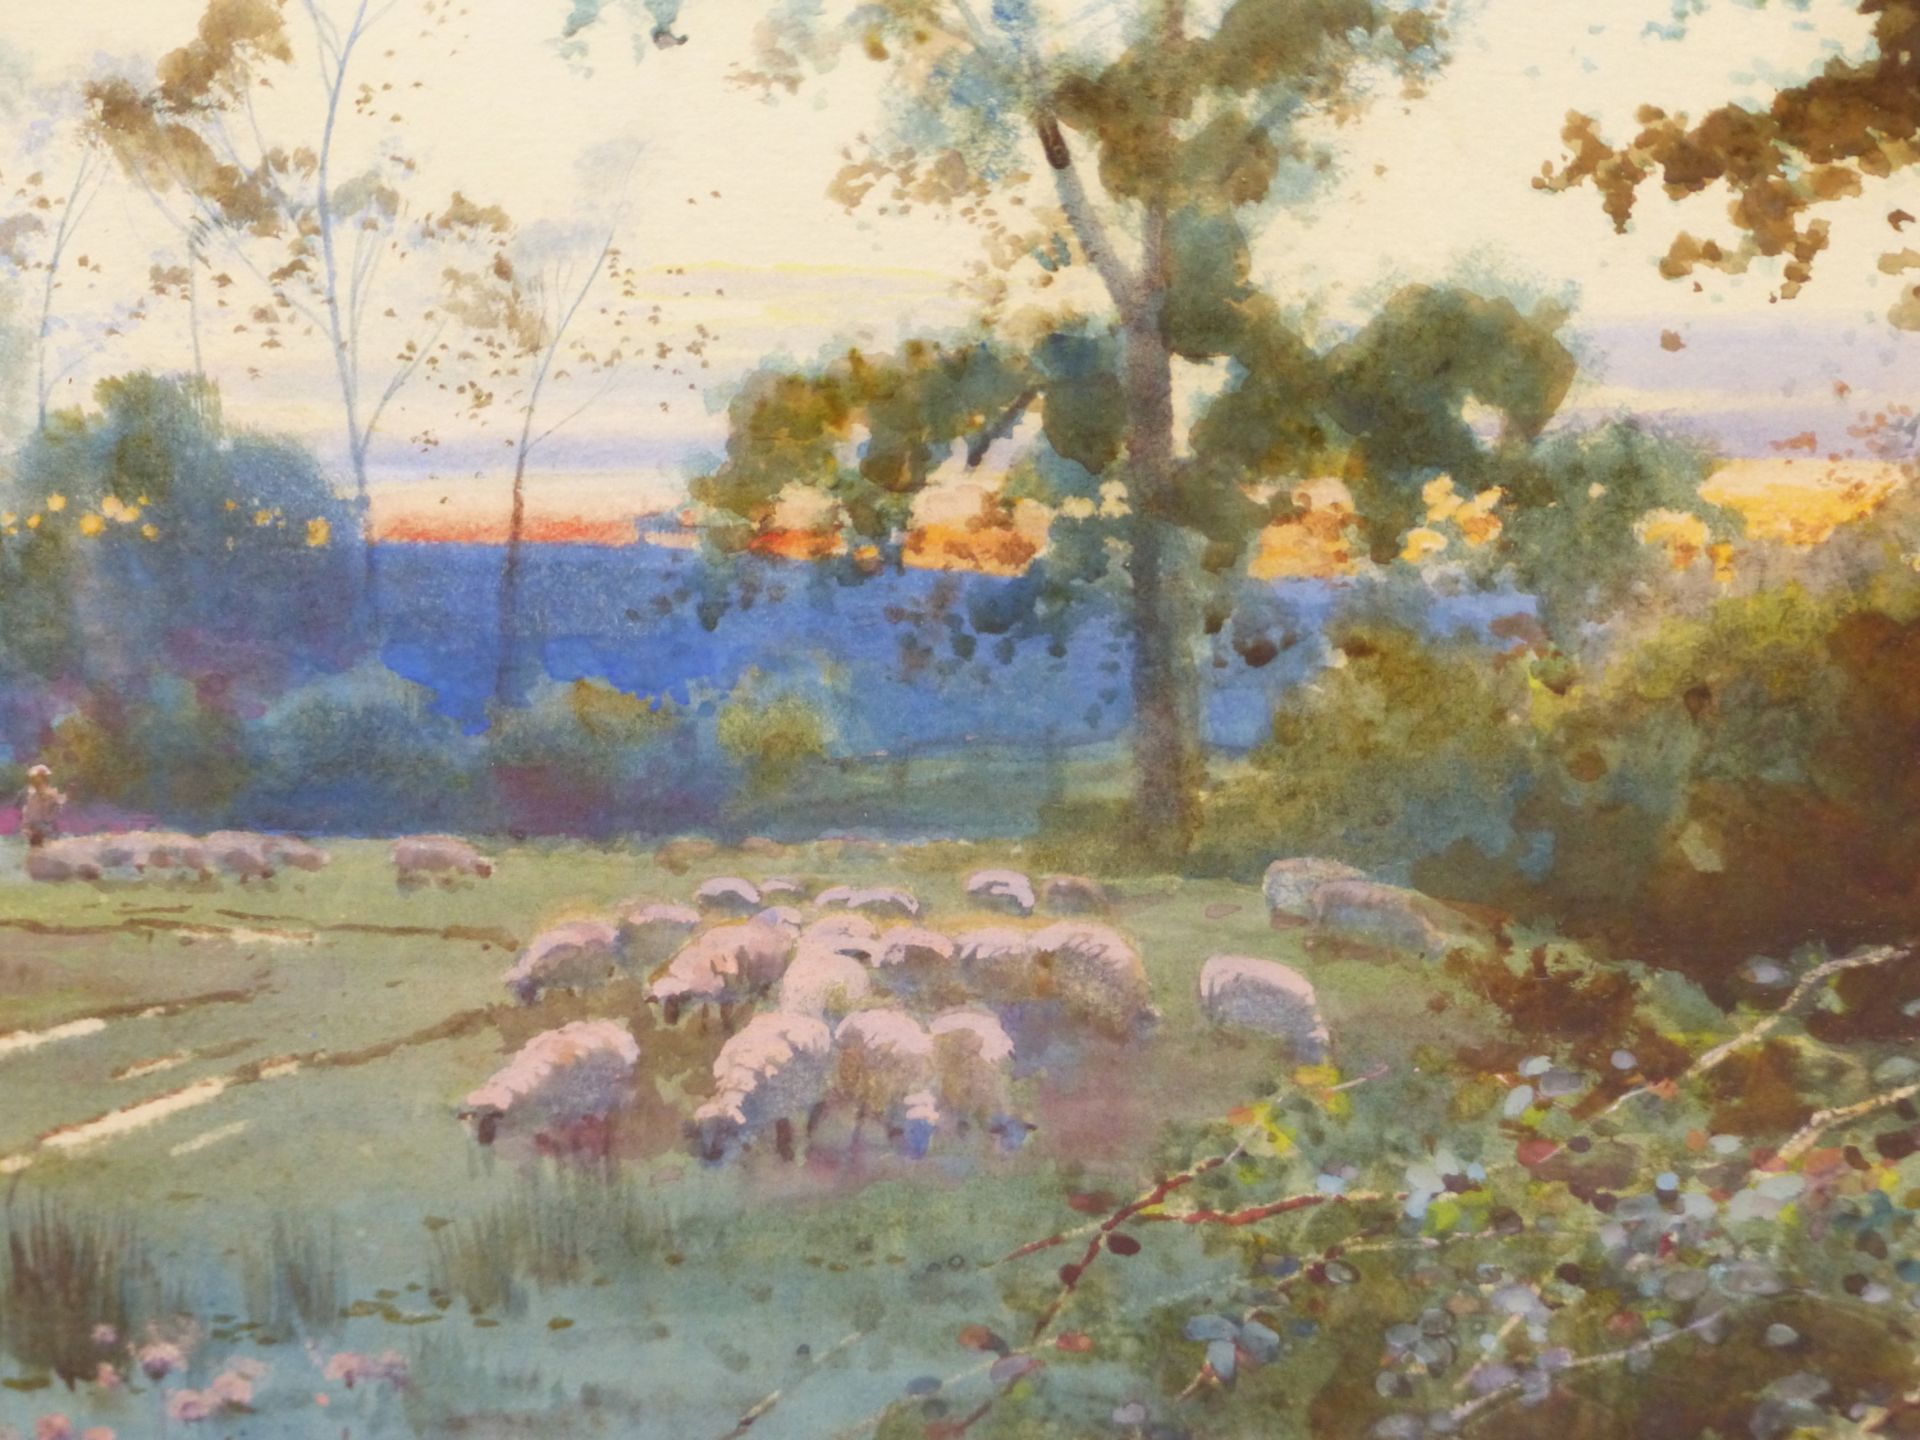 WILLIAM MATHISON (FL.1883-1923) SHEEP IN A RIVERSIDE MEADOW, WATERCOLOUR, SIGNED LOWER LEFT. 71 X 47 - Image 3 of 7